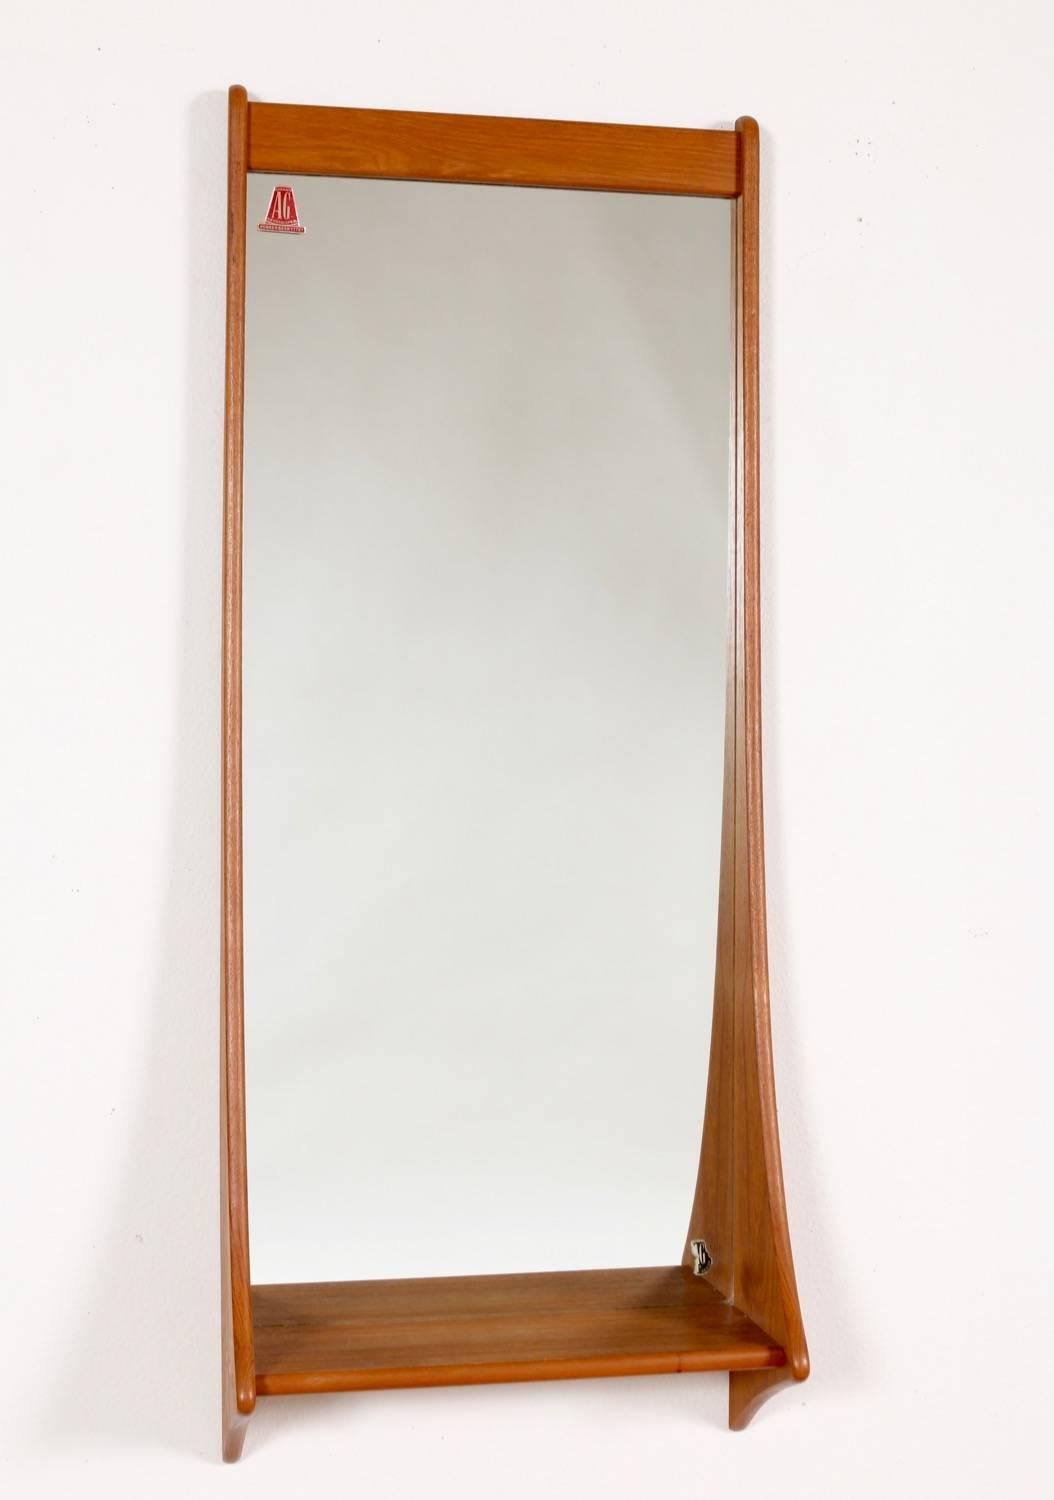 This sculptural teak, hanging wall mirror with shelf by Pedersen and Hansen, offers impactful artistic style and function in a relatively narrow space. Measuring 43.5 inches high x 17.5 inches wide x 6.6 inches deep the shelf is deep enough to hold